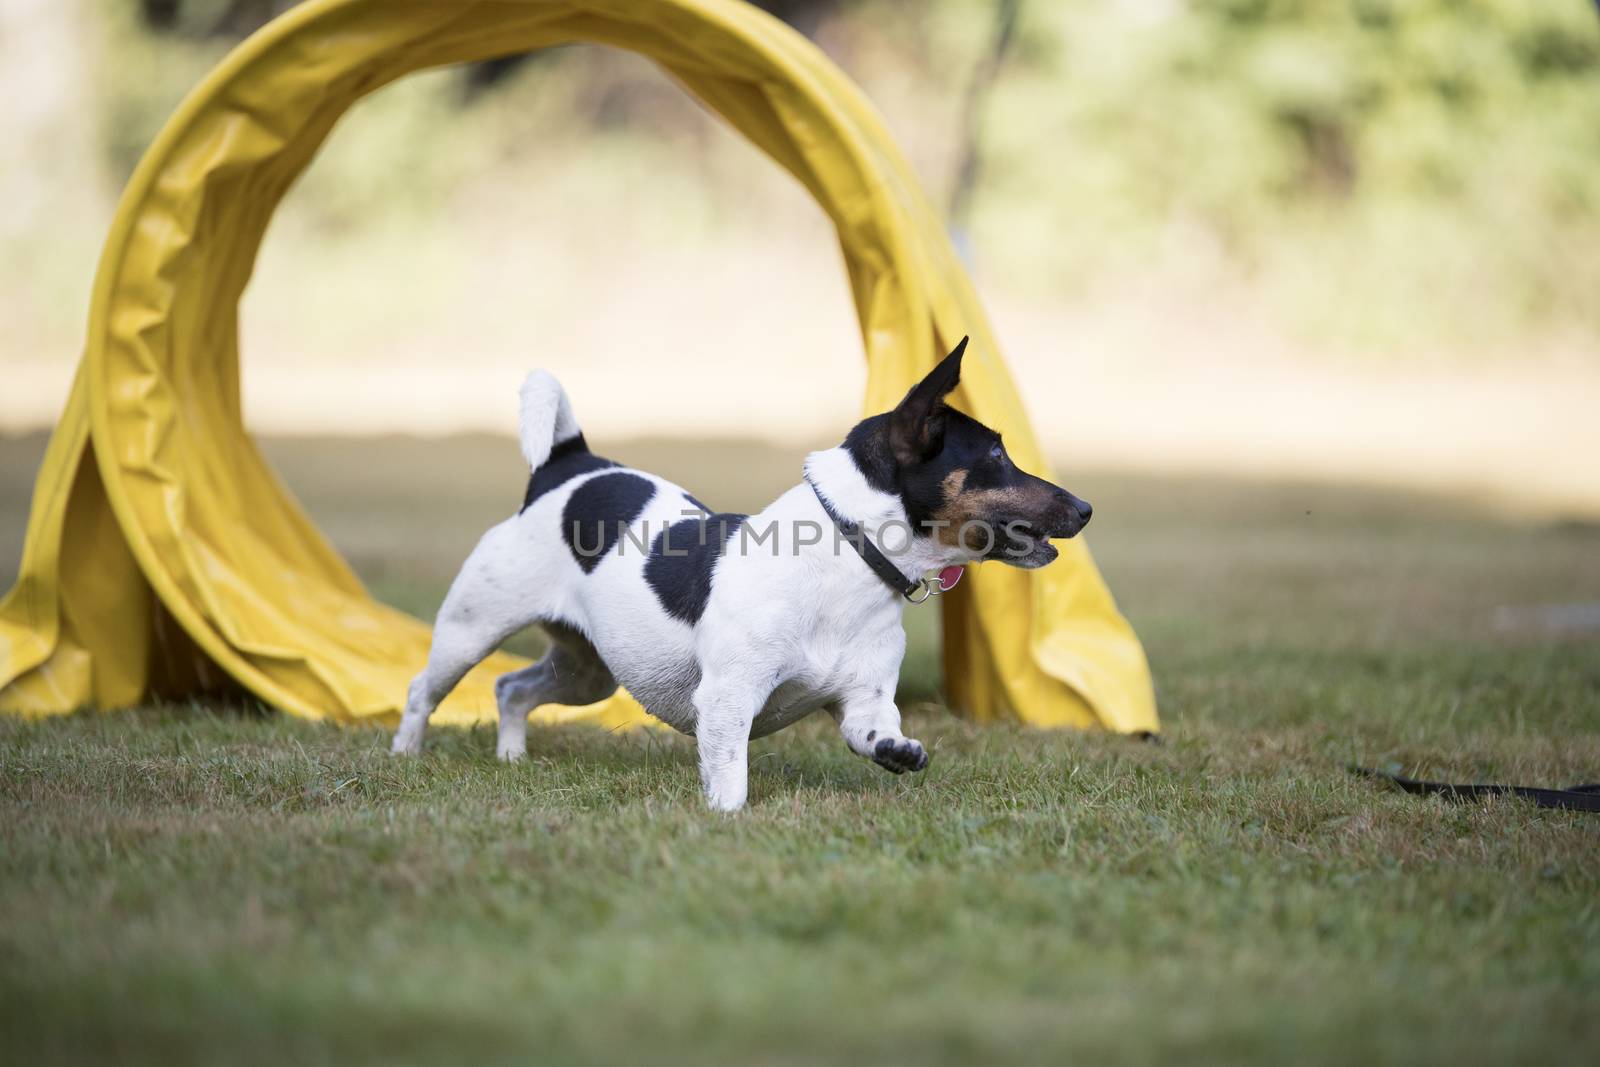 Jack Russell terrier running through agility tunnel